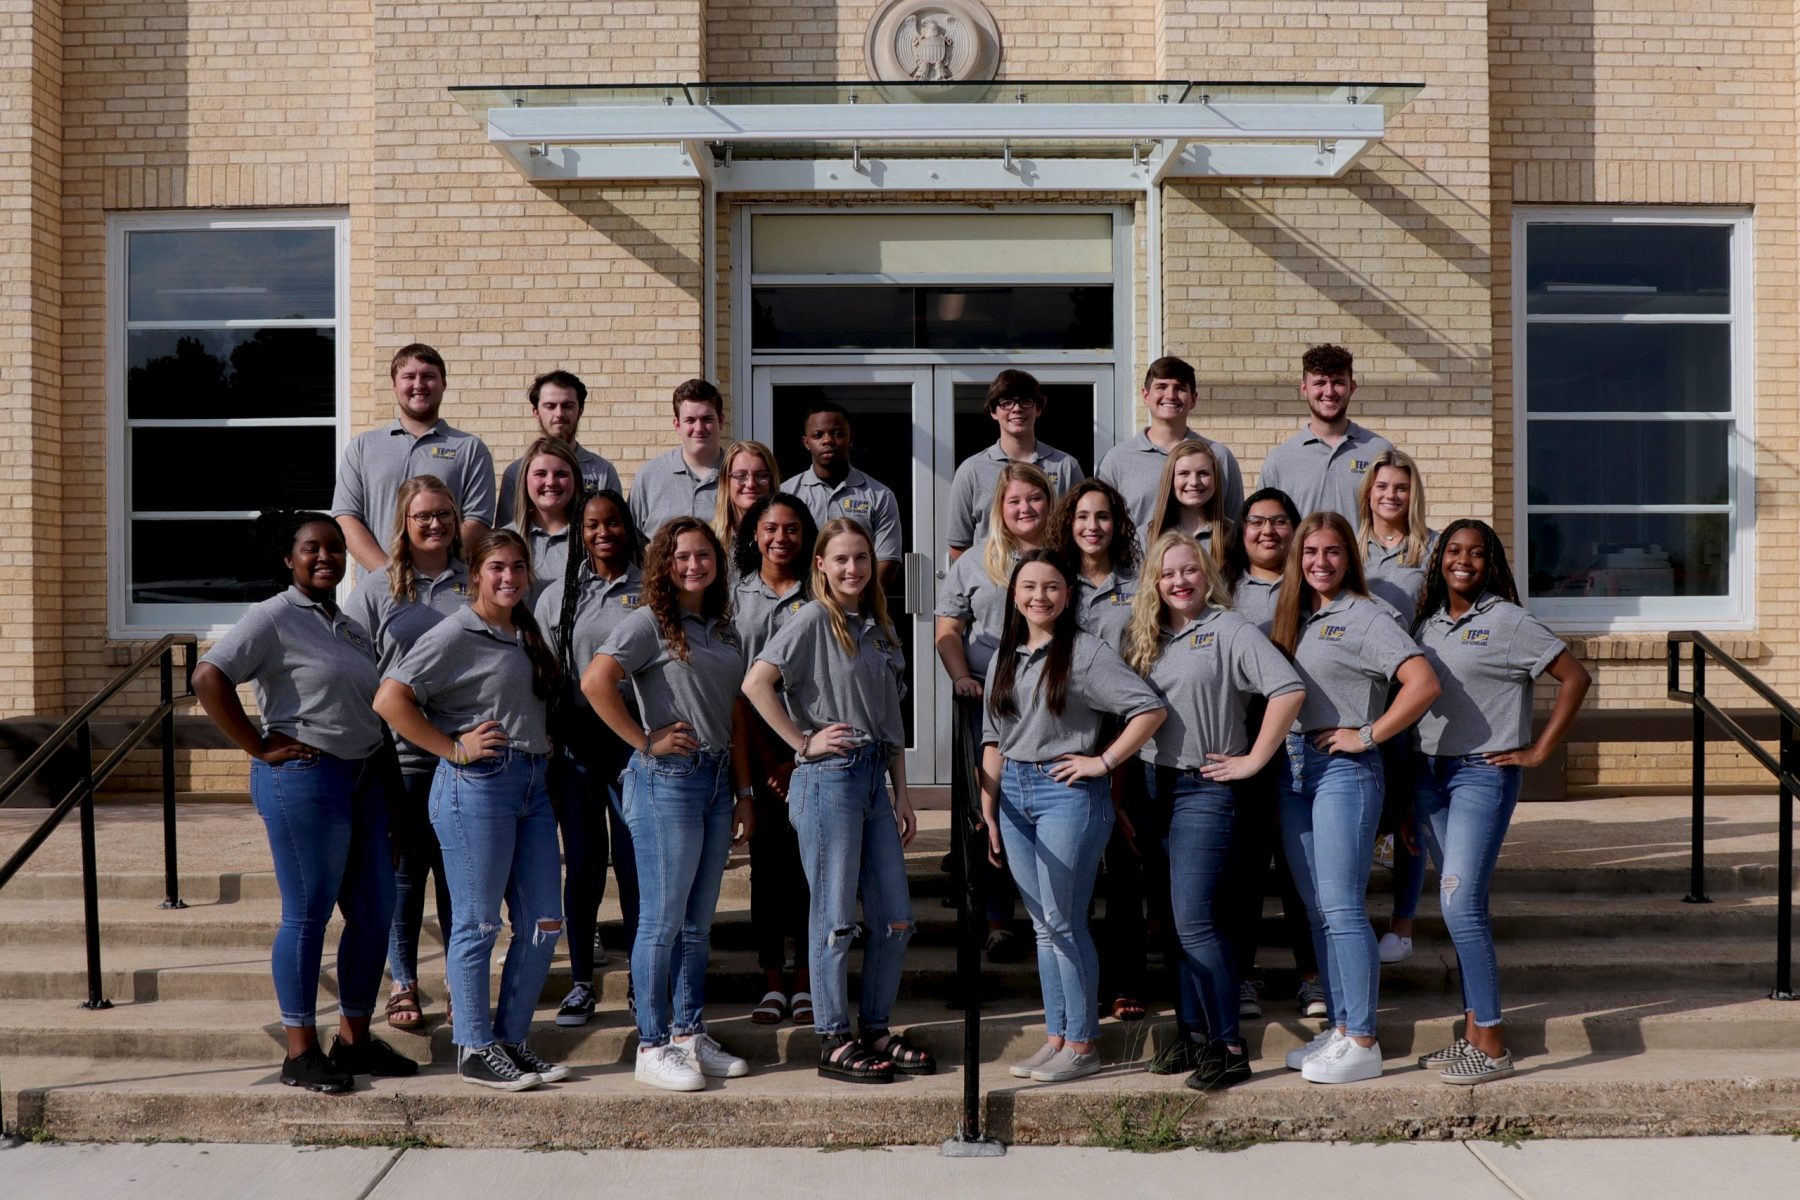 students in gray shirts and jeans on the front steps of a brick building